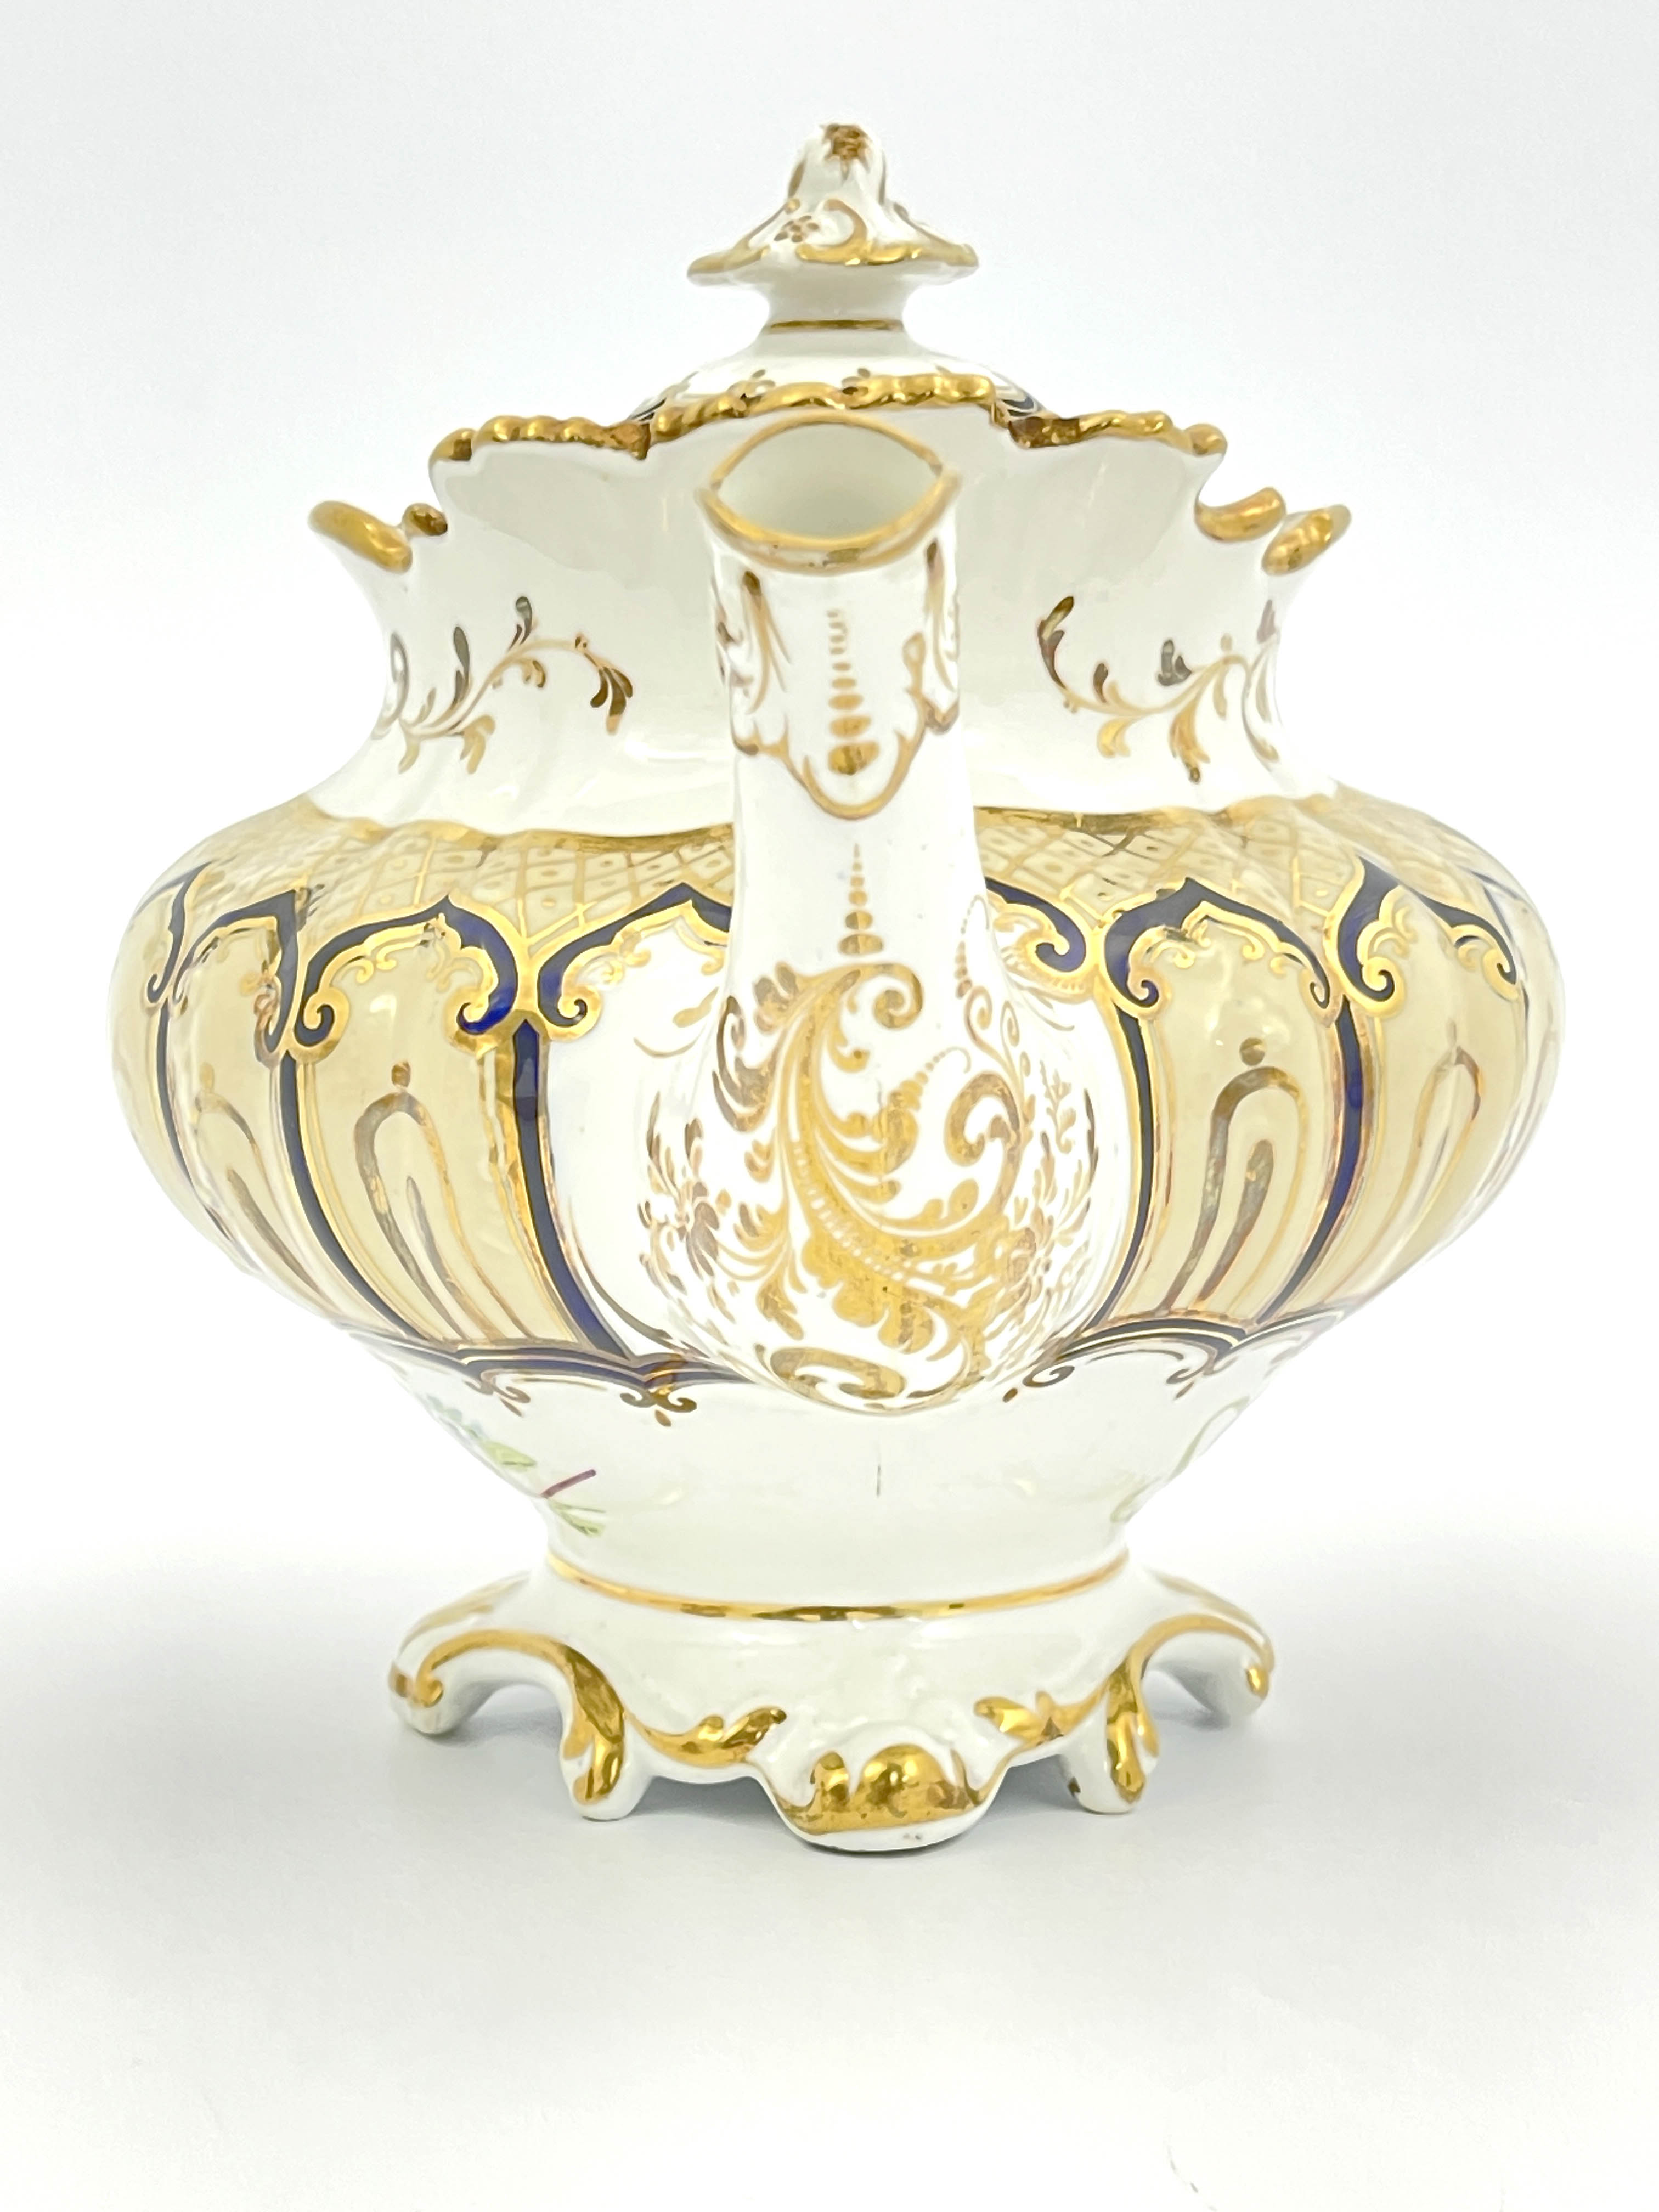 An English bone china teapot and cover, circa 1840, of Rococo design with gilt and blue ogee cover - Image 3 of 8